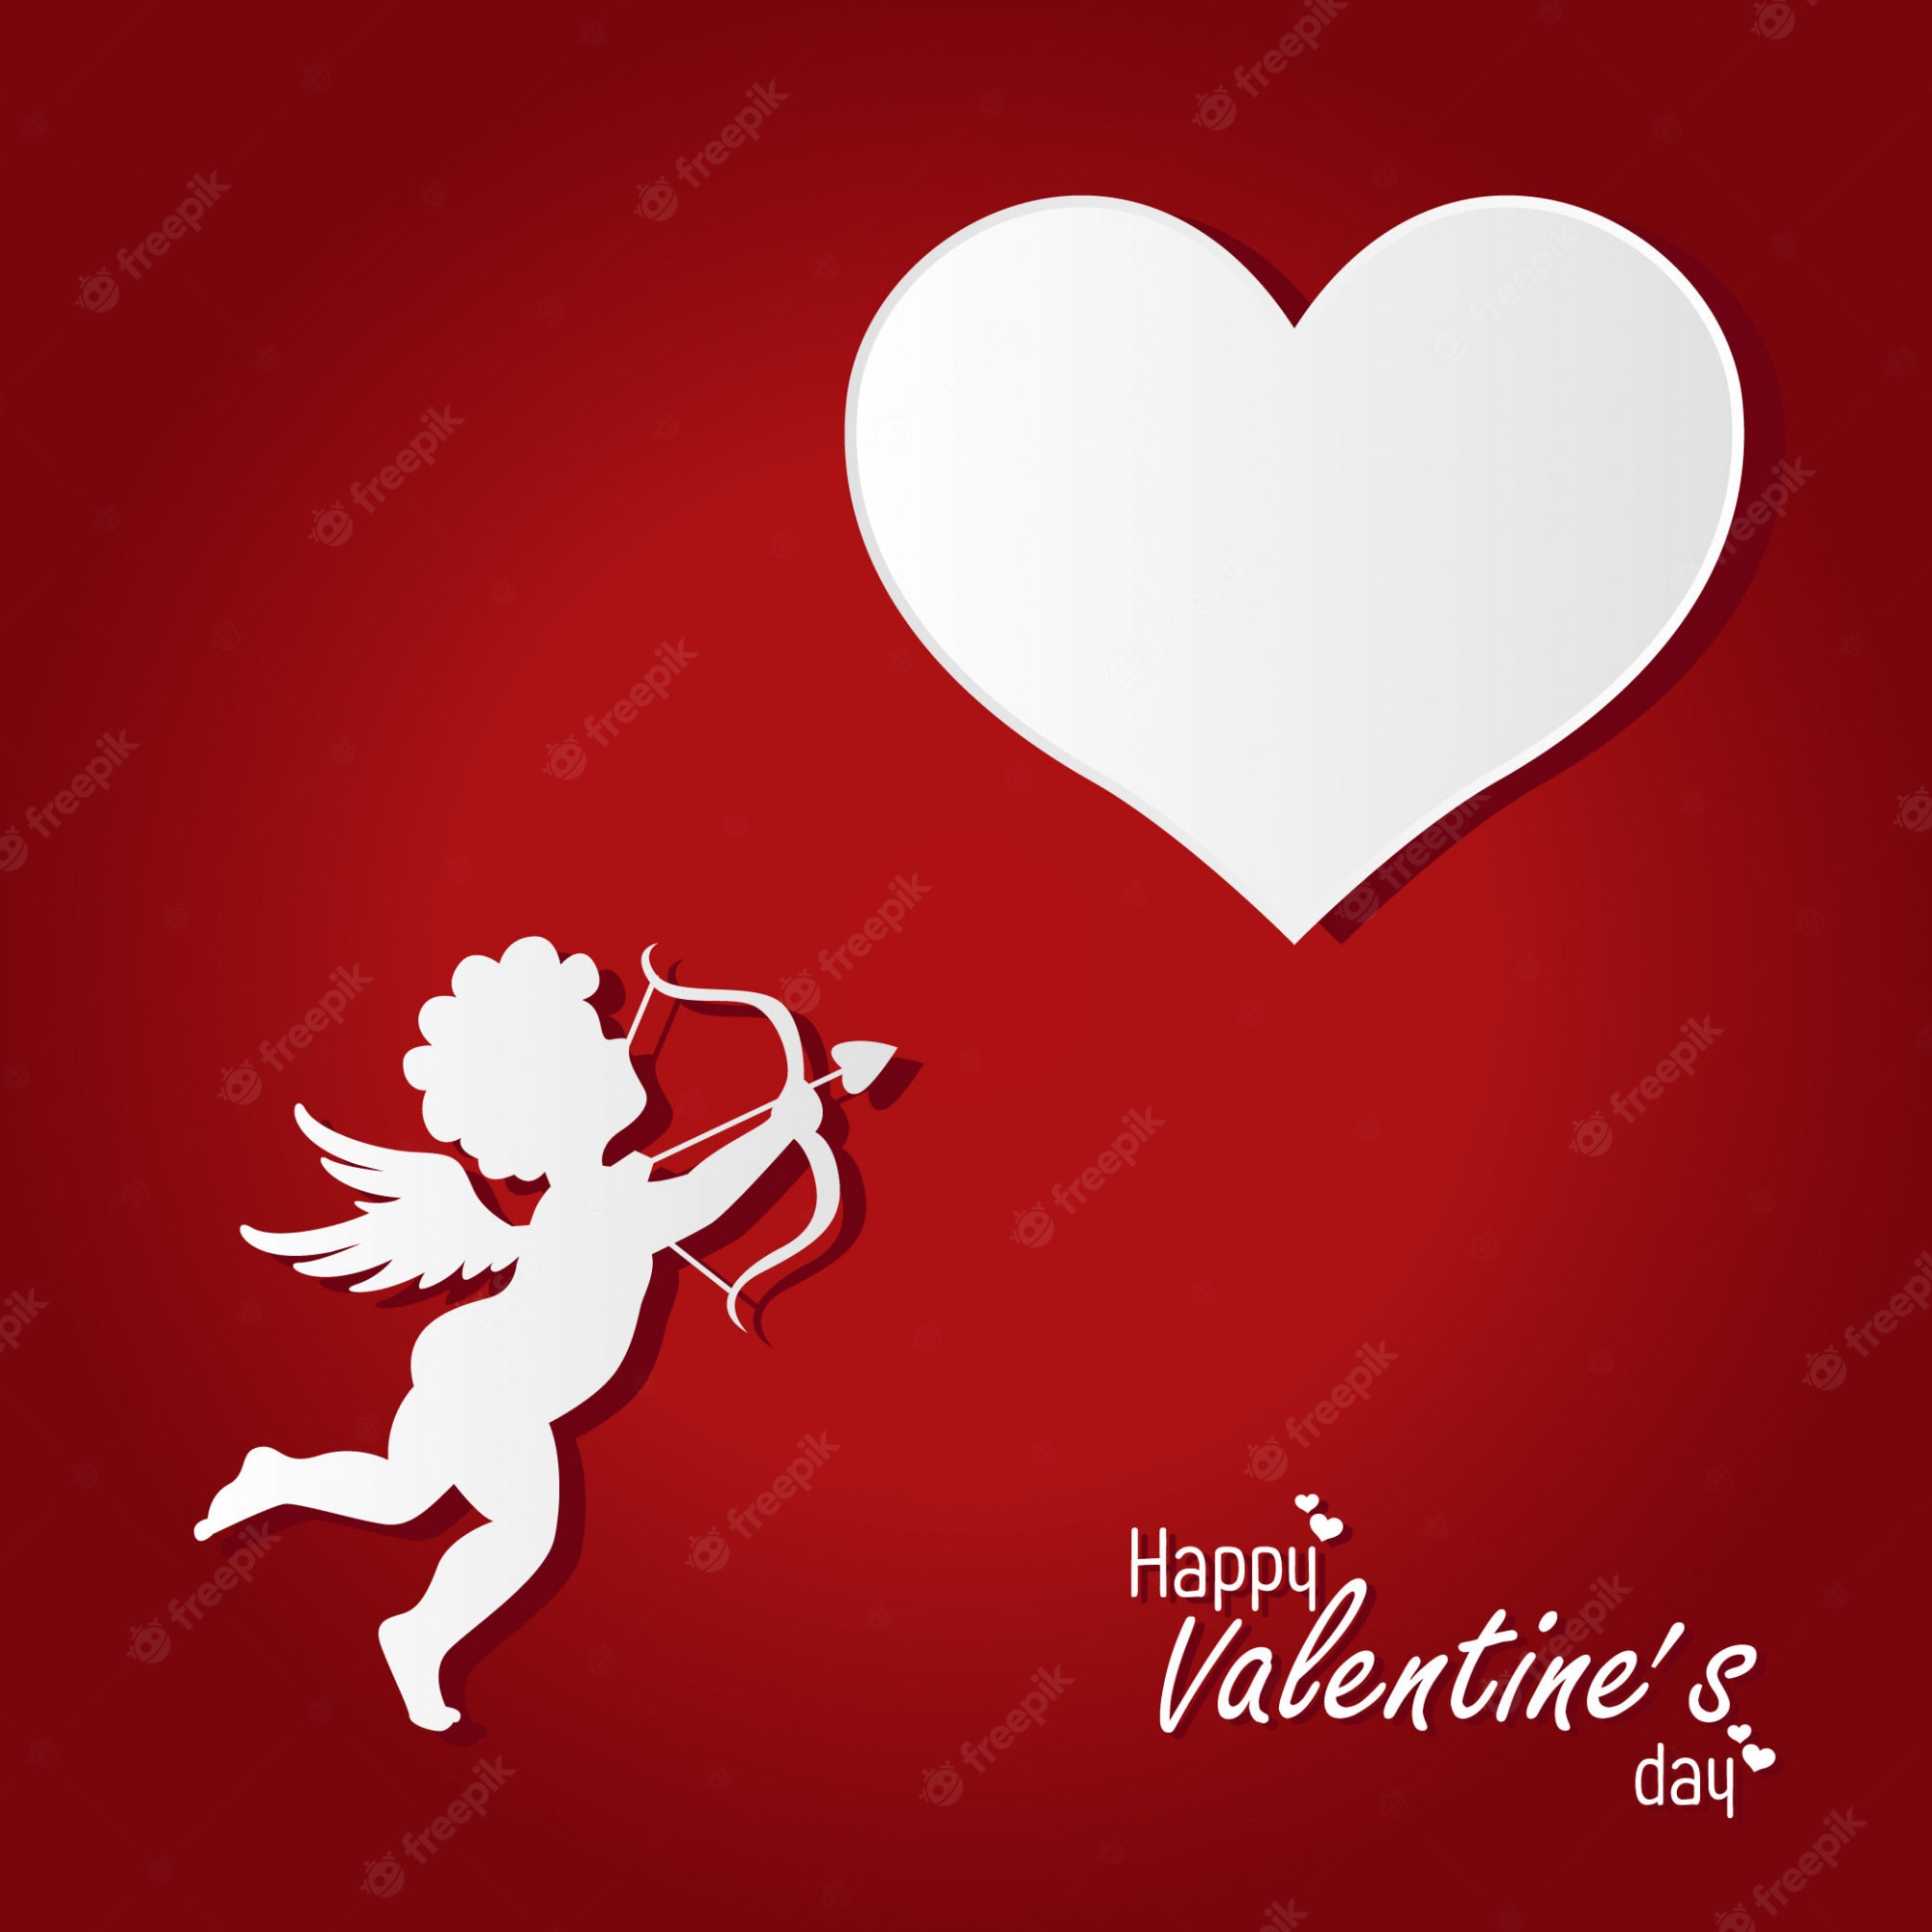 Premium Photo | Flying cupid silhouette, happy valentine's day banners,  paper art style. amour on red paper